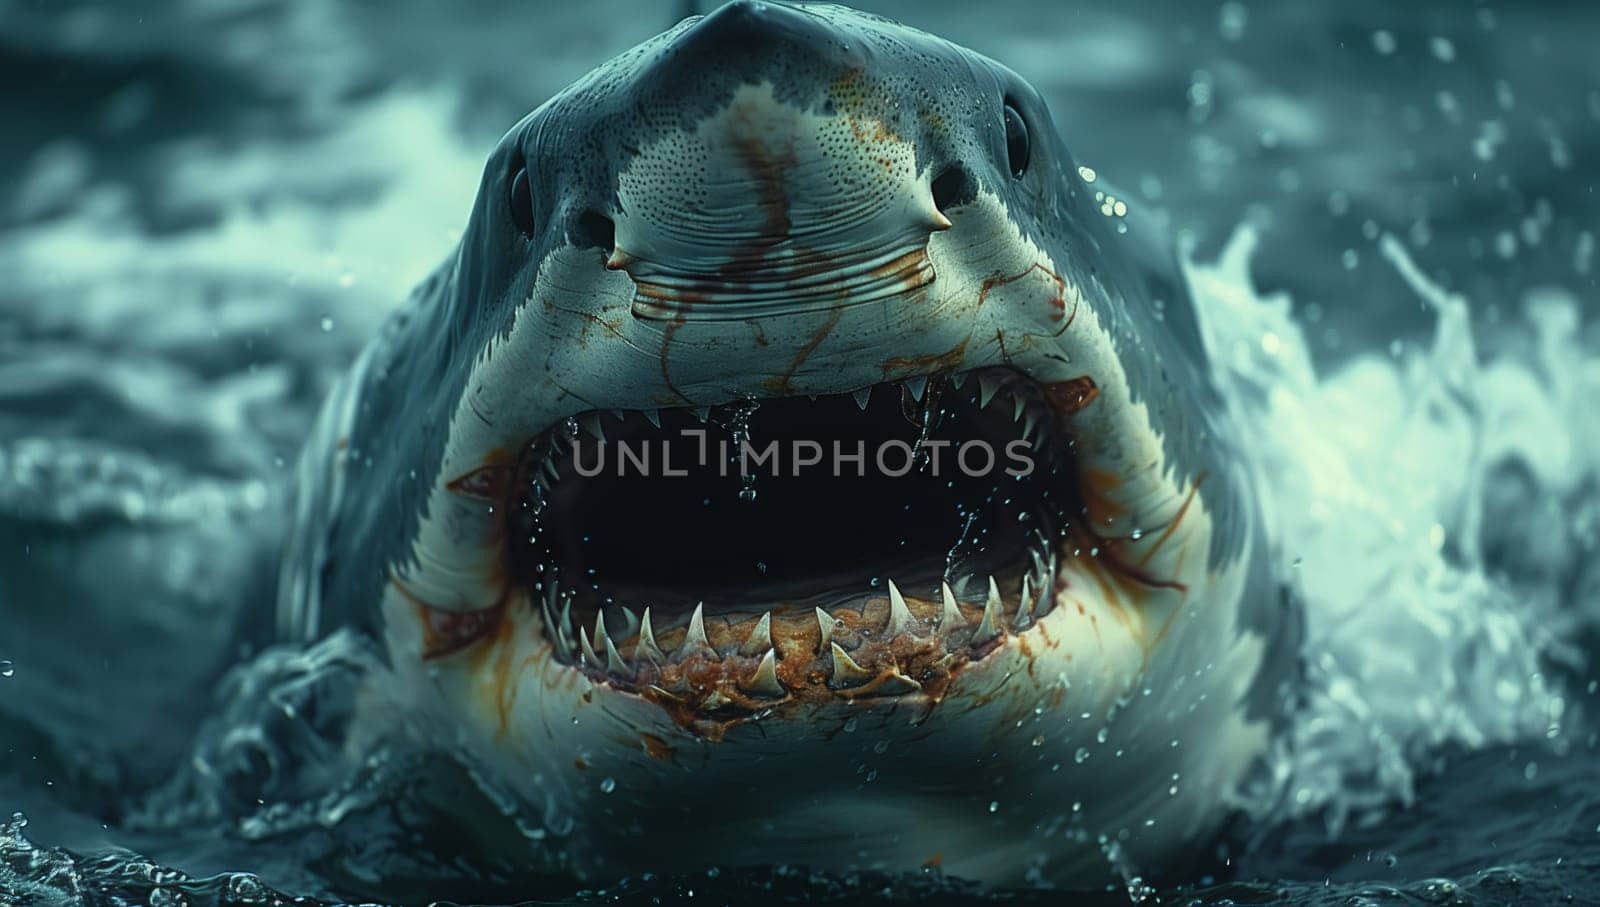 A Lamniformes shark gracefully swims through the water, showcasing its fangs as it glides with its mouth open, a beautiful sight in marine biology